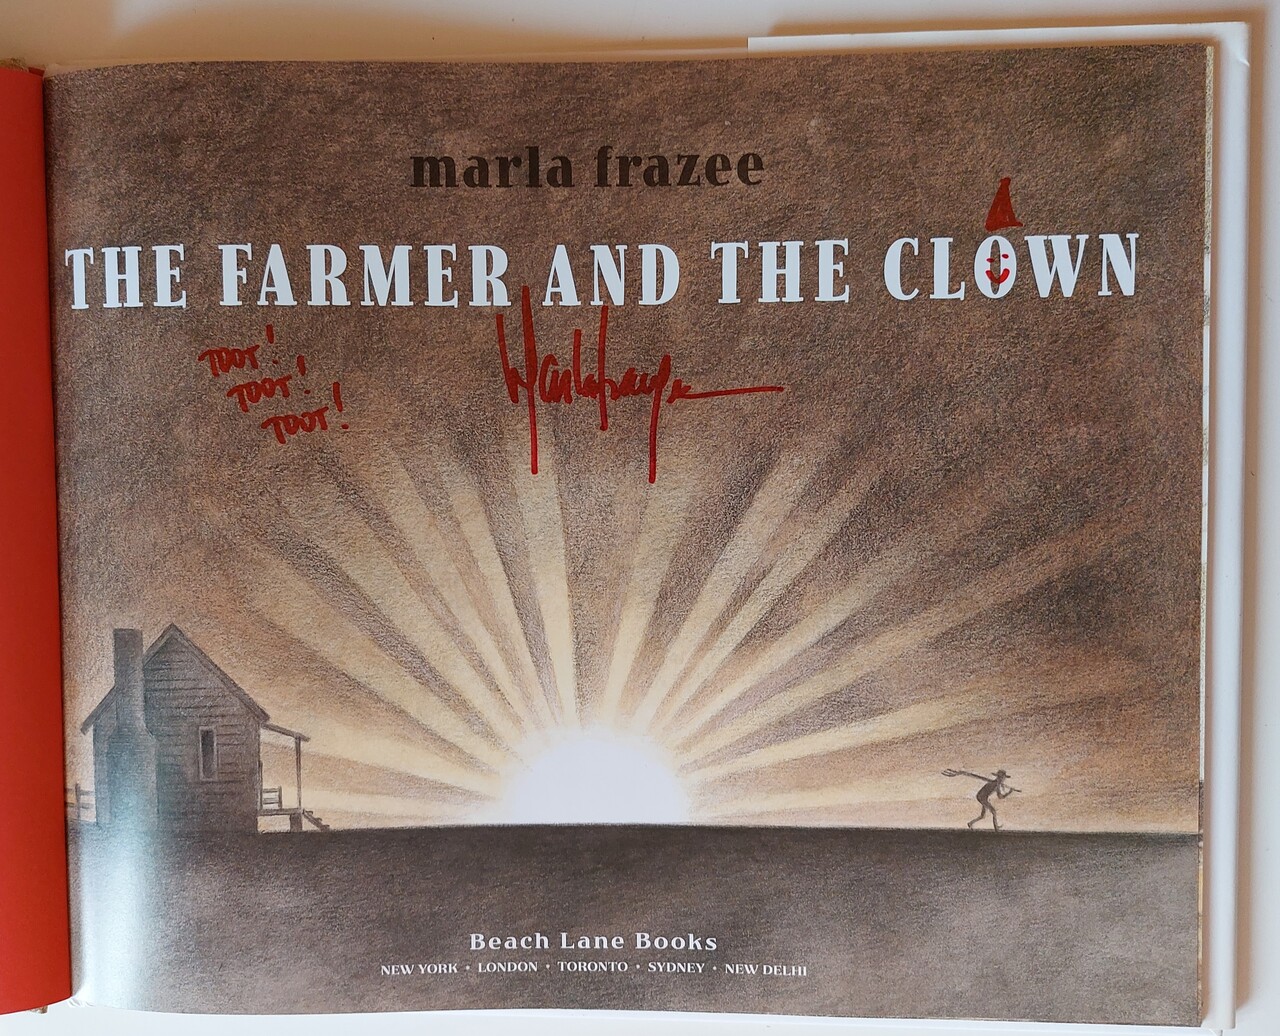 The-Farmer-and-the-Clown-signed-by-Marla-Frazee.jpg